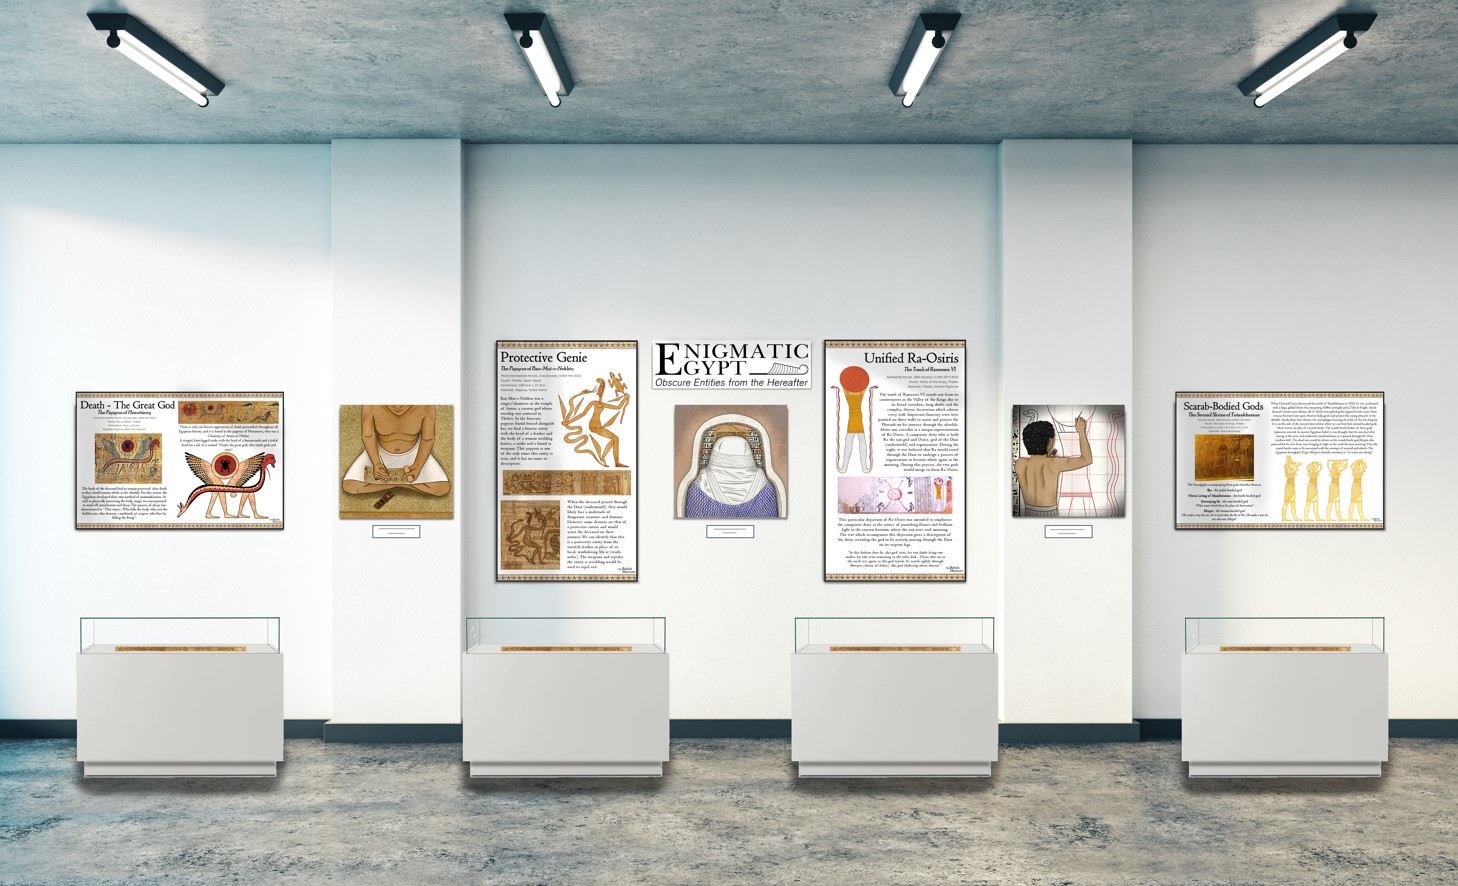 A museum exhibition showcasing Ancient Egyptian papyri accompanied by informational graphics and illustrations of the objects in their original context.